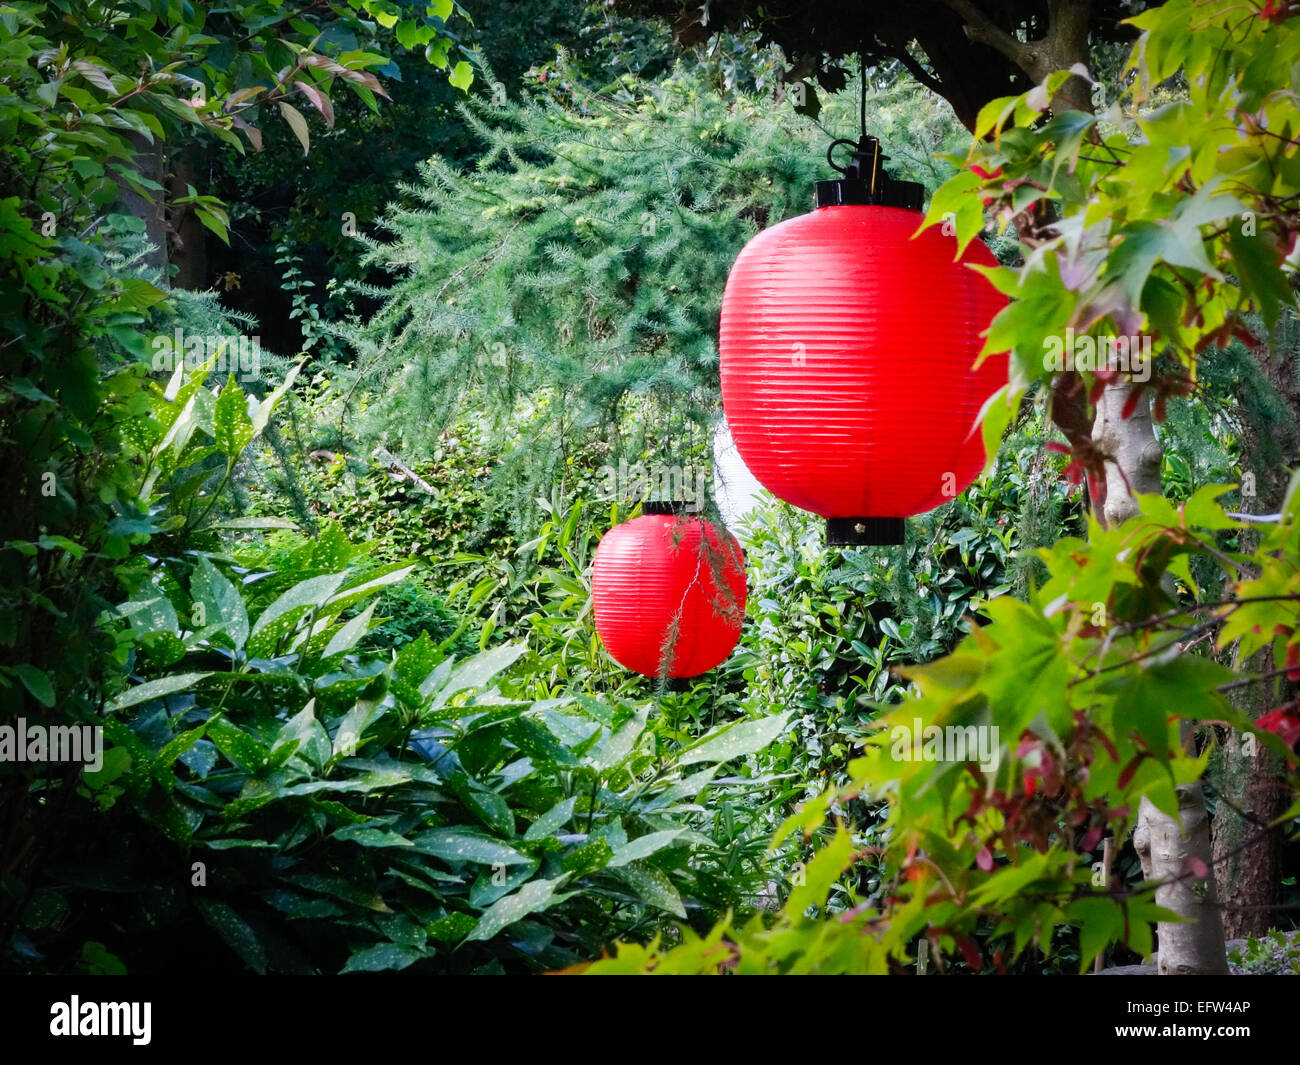 Red and white paper lanterns hung in a beautiful, peaceful leafy garden.  Celebrations, new year, party decorations. Stock Photo